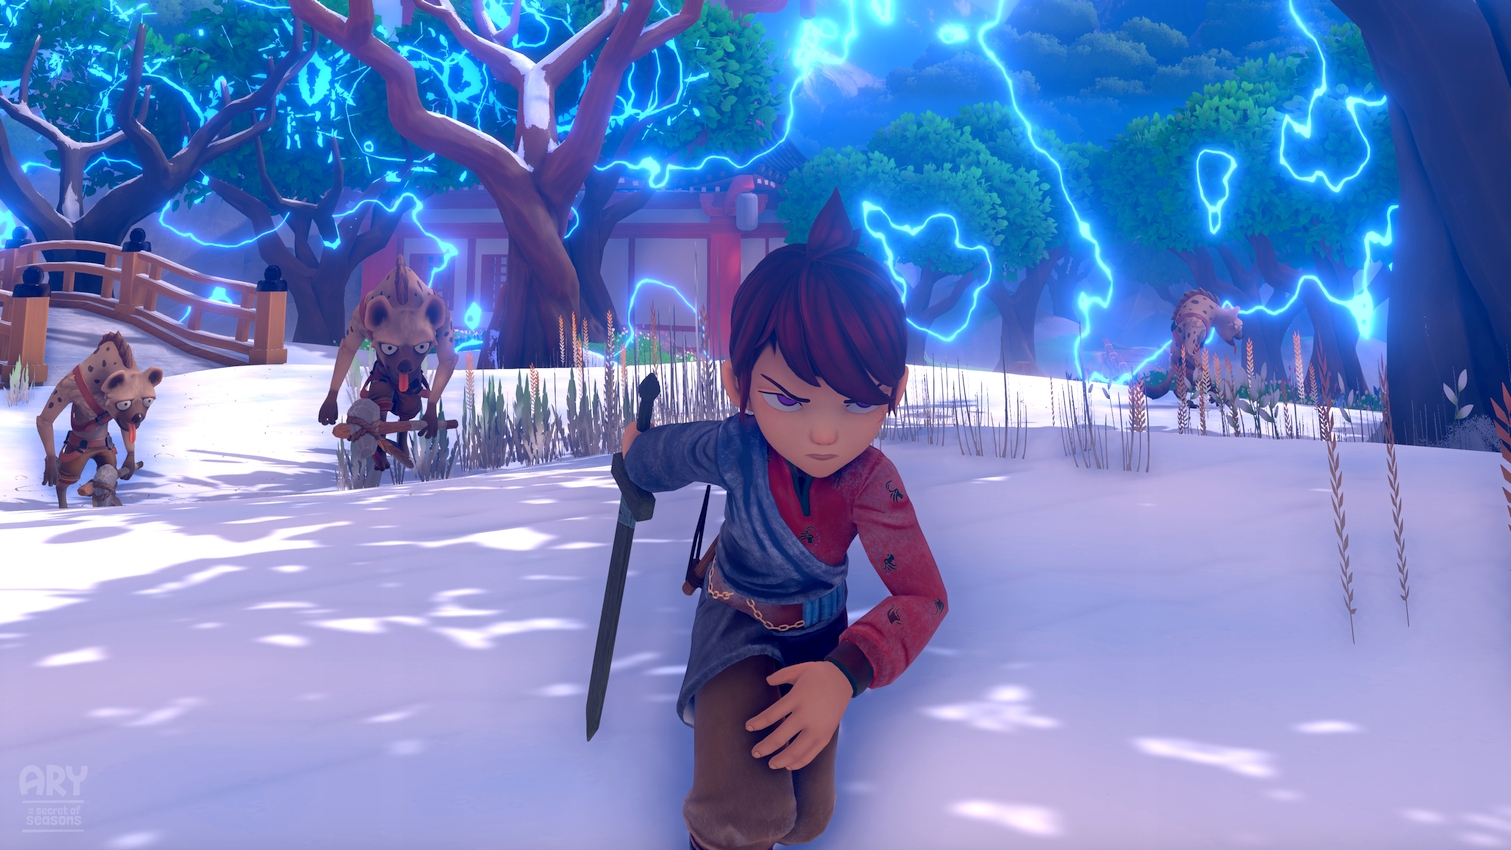 Modus Games Releases Gameplay Overview For Upcoming Game Ary and the Secret of Seasons